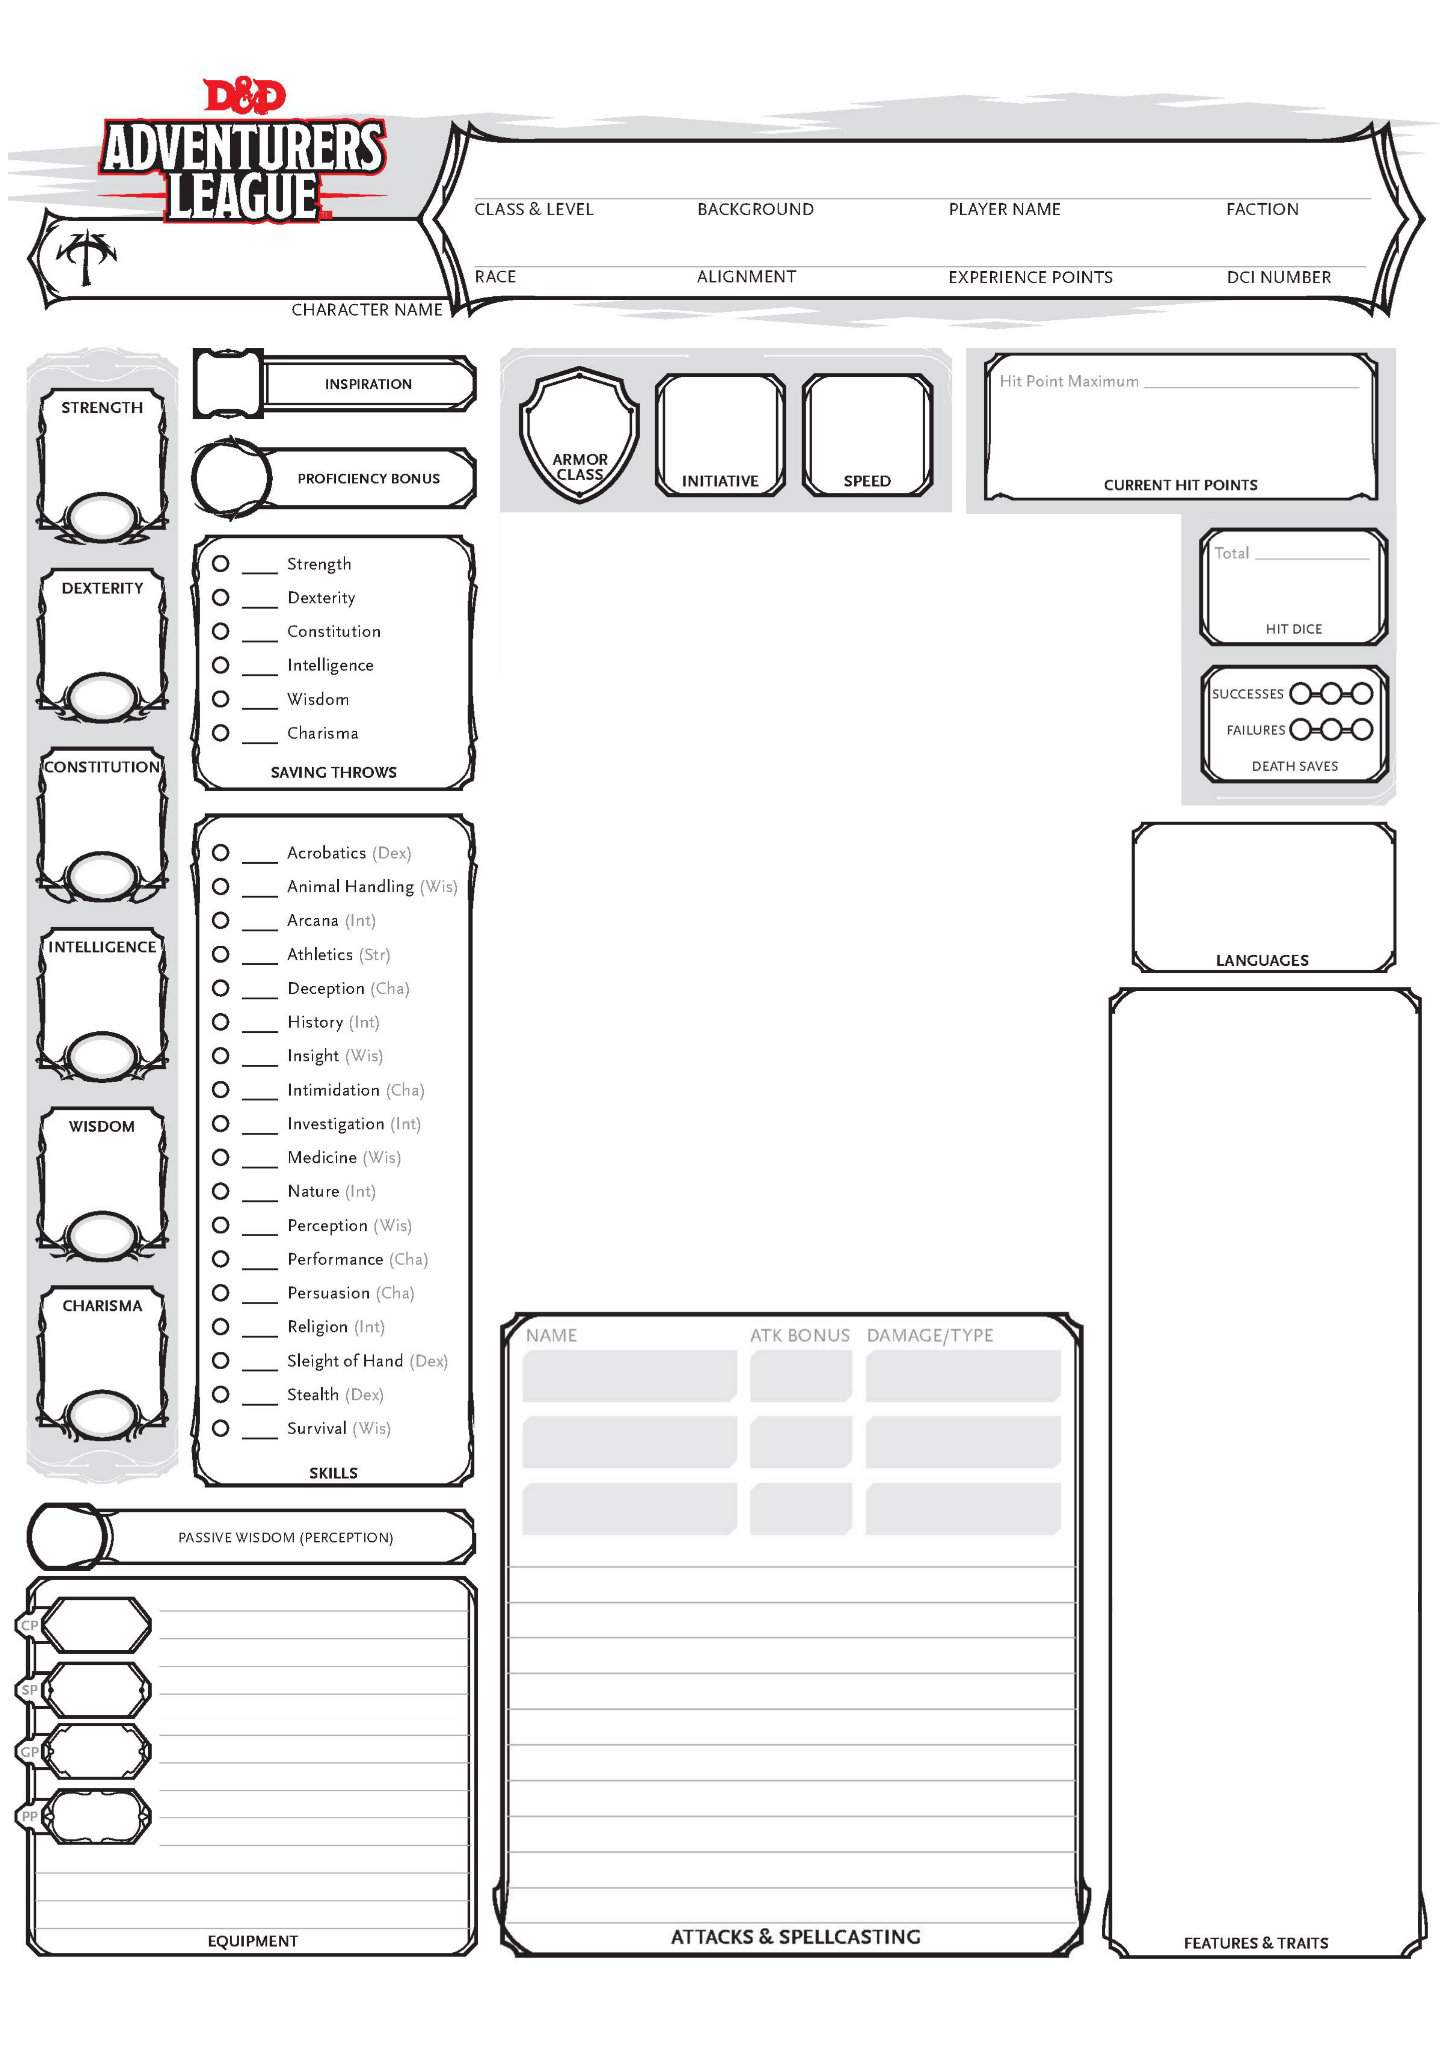 dnd-character-sheet-character-sheet-character-sheet-template-images